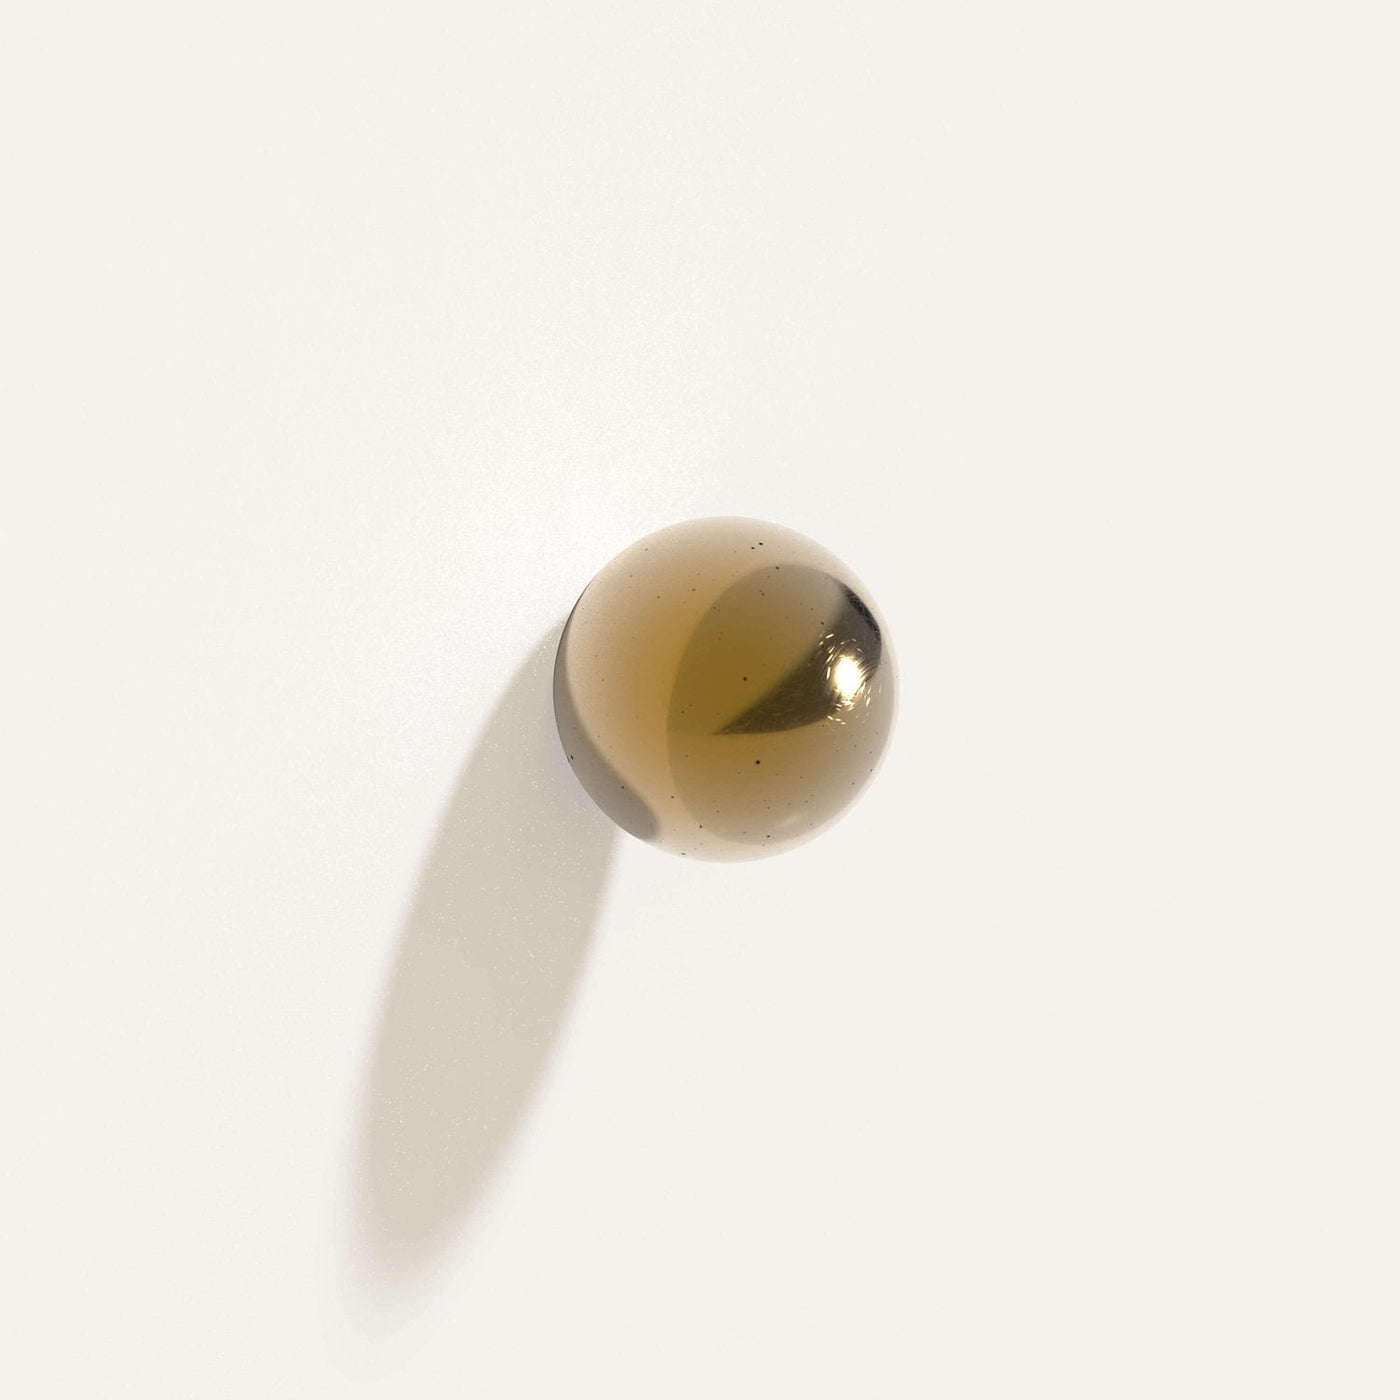 Cercle Knob Large in polished bronze installed on a white wall.